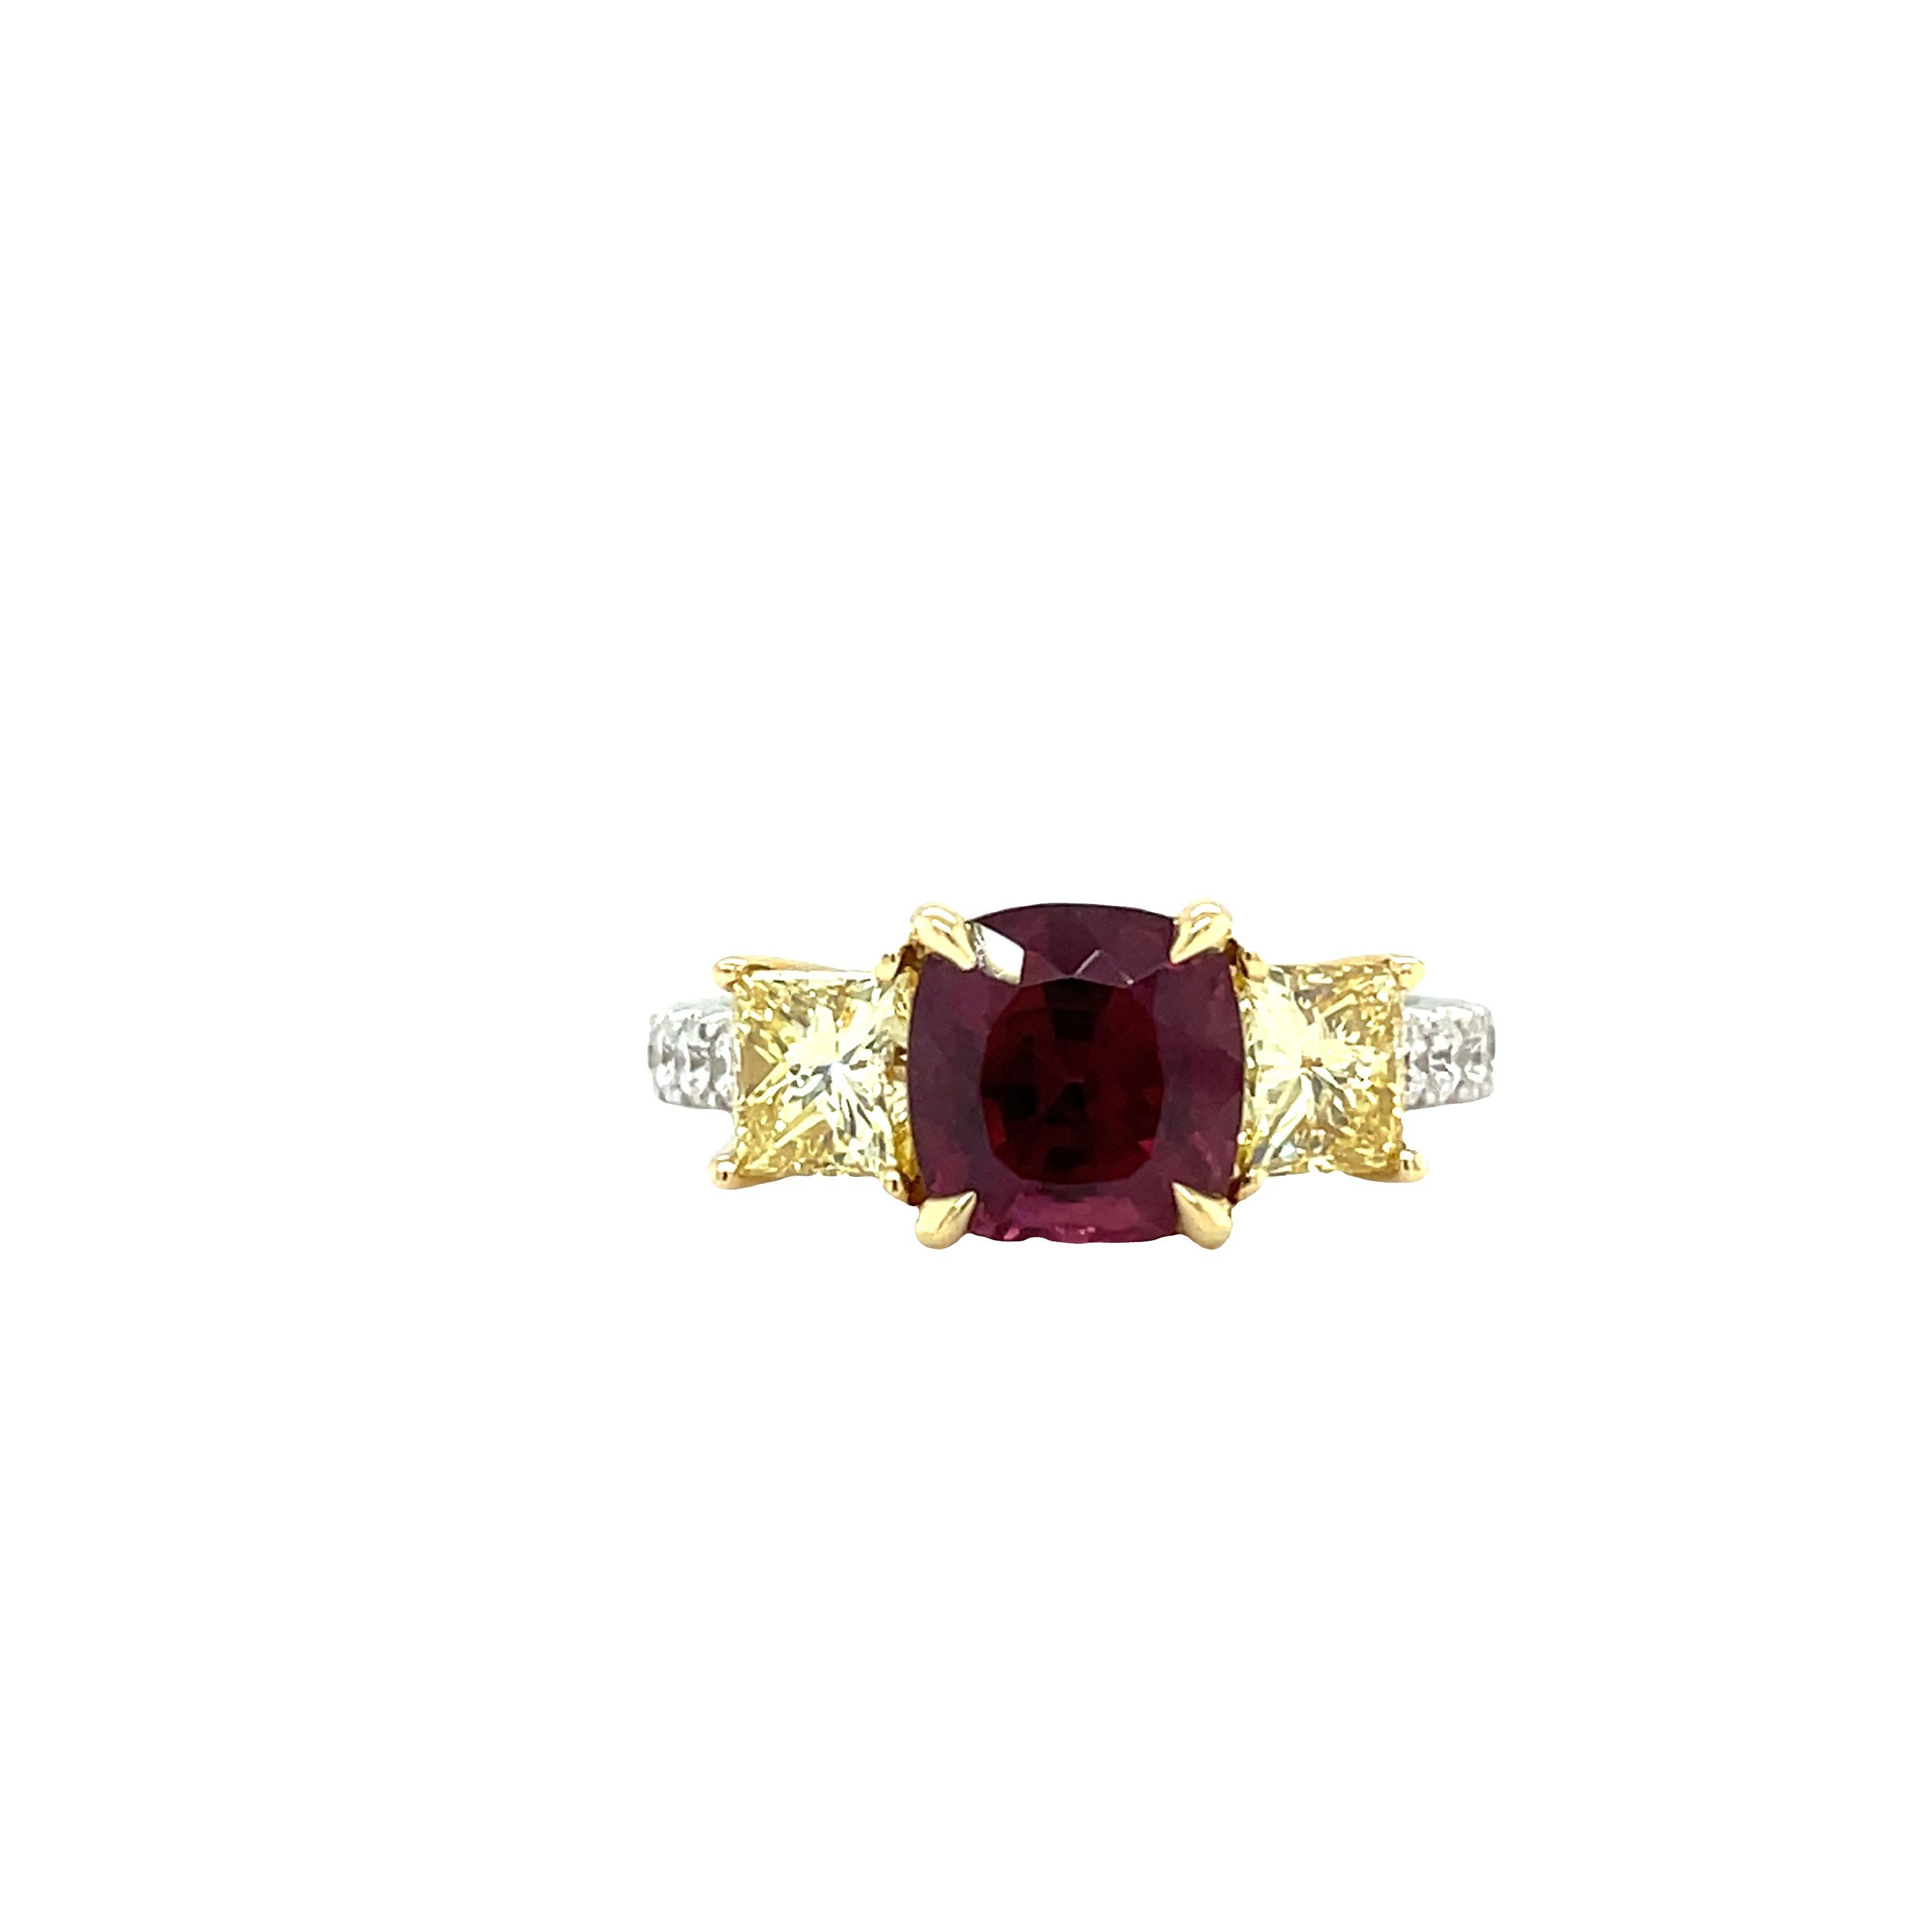 Designed and handcrafted by our team at Gems Are Forever, Beverly Hills. This gorgeous 18kt yellow and white gold ring is centered with GIA certified 3.02 ct cushion cut no heat ruby accented with two princess cut fancy yellow diamonds 1.10 carats